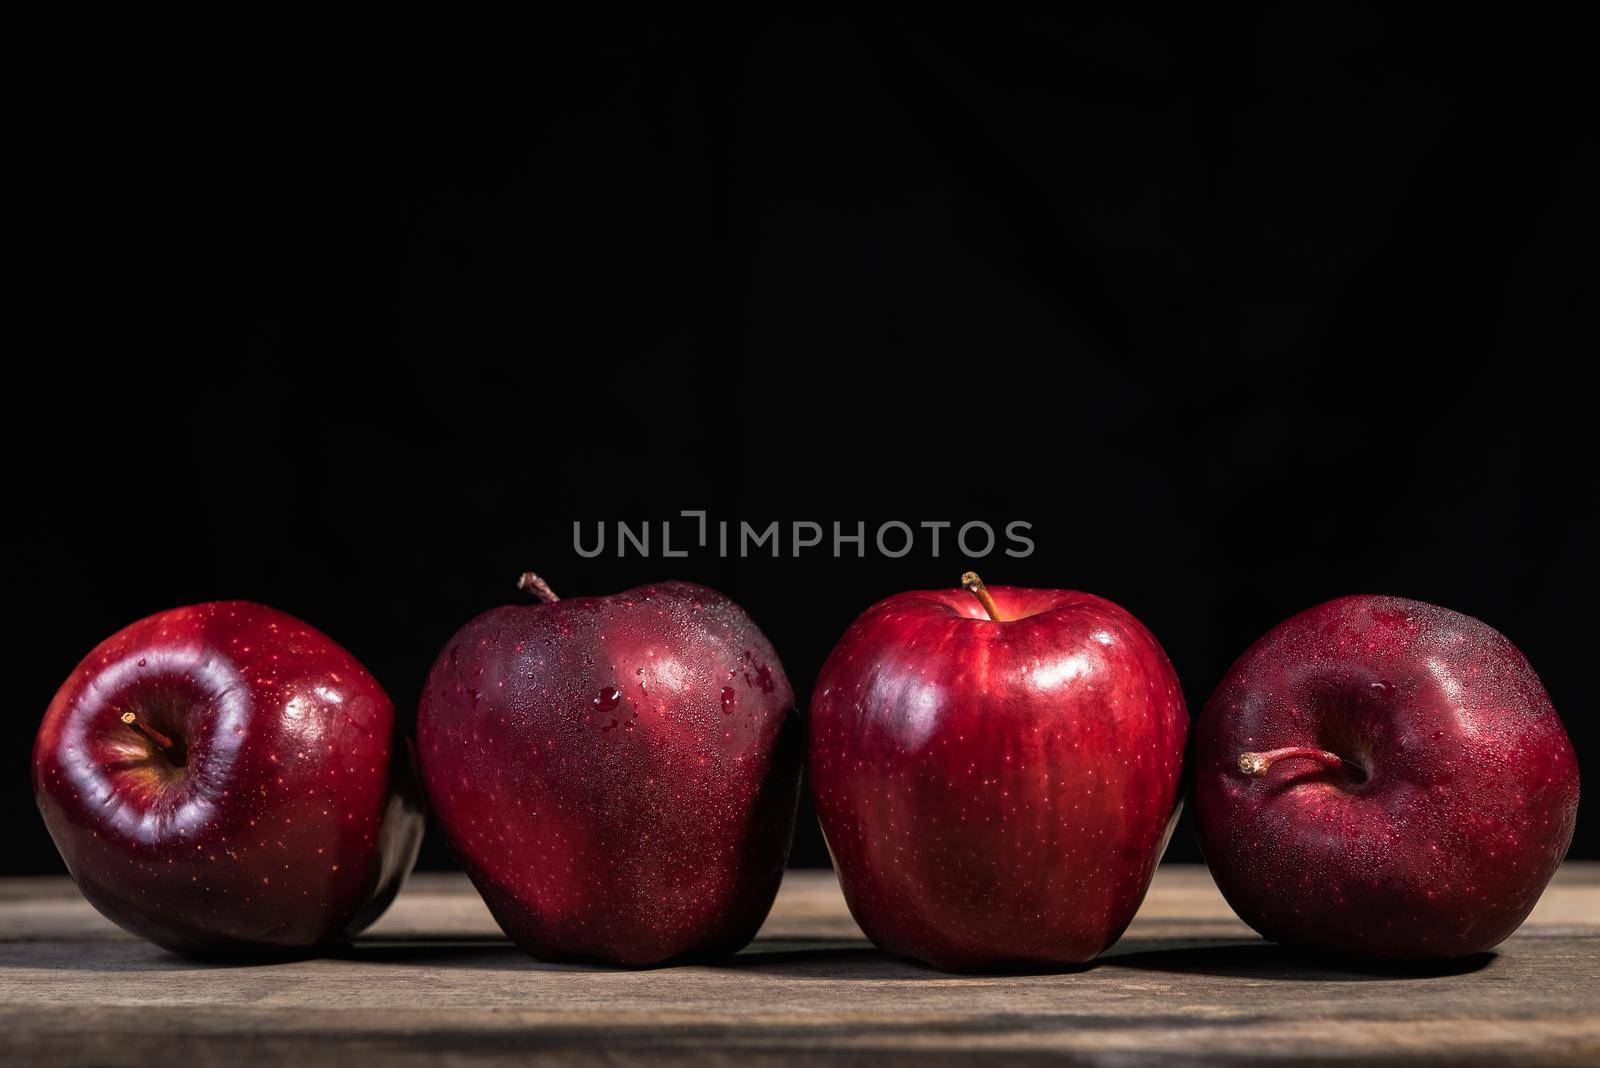 Red apple on wood table, black background by Wmpix